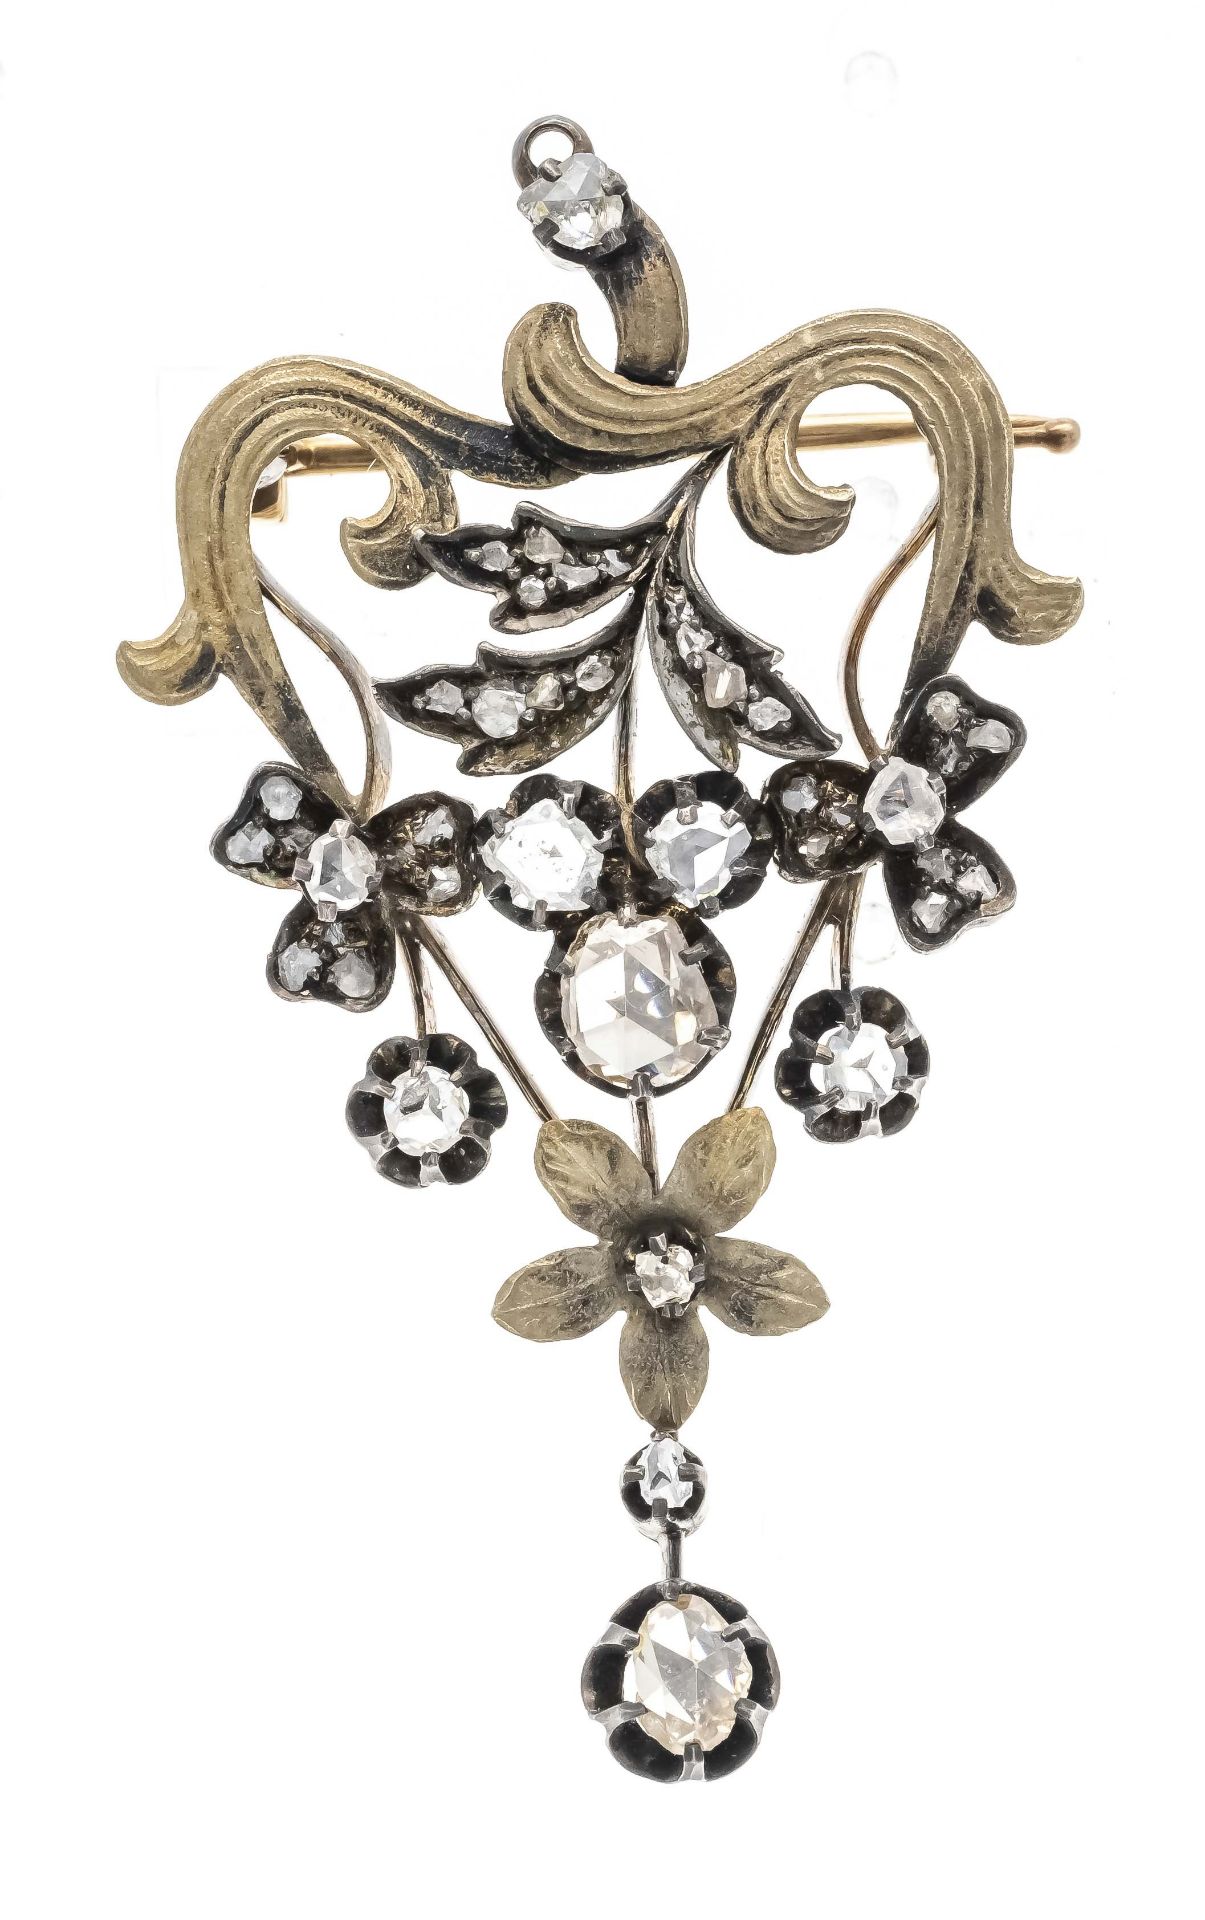 A floral diamond rose brooch, circa 1880, silver 900/000 on GG 585/000 unmarked, tested, with 32